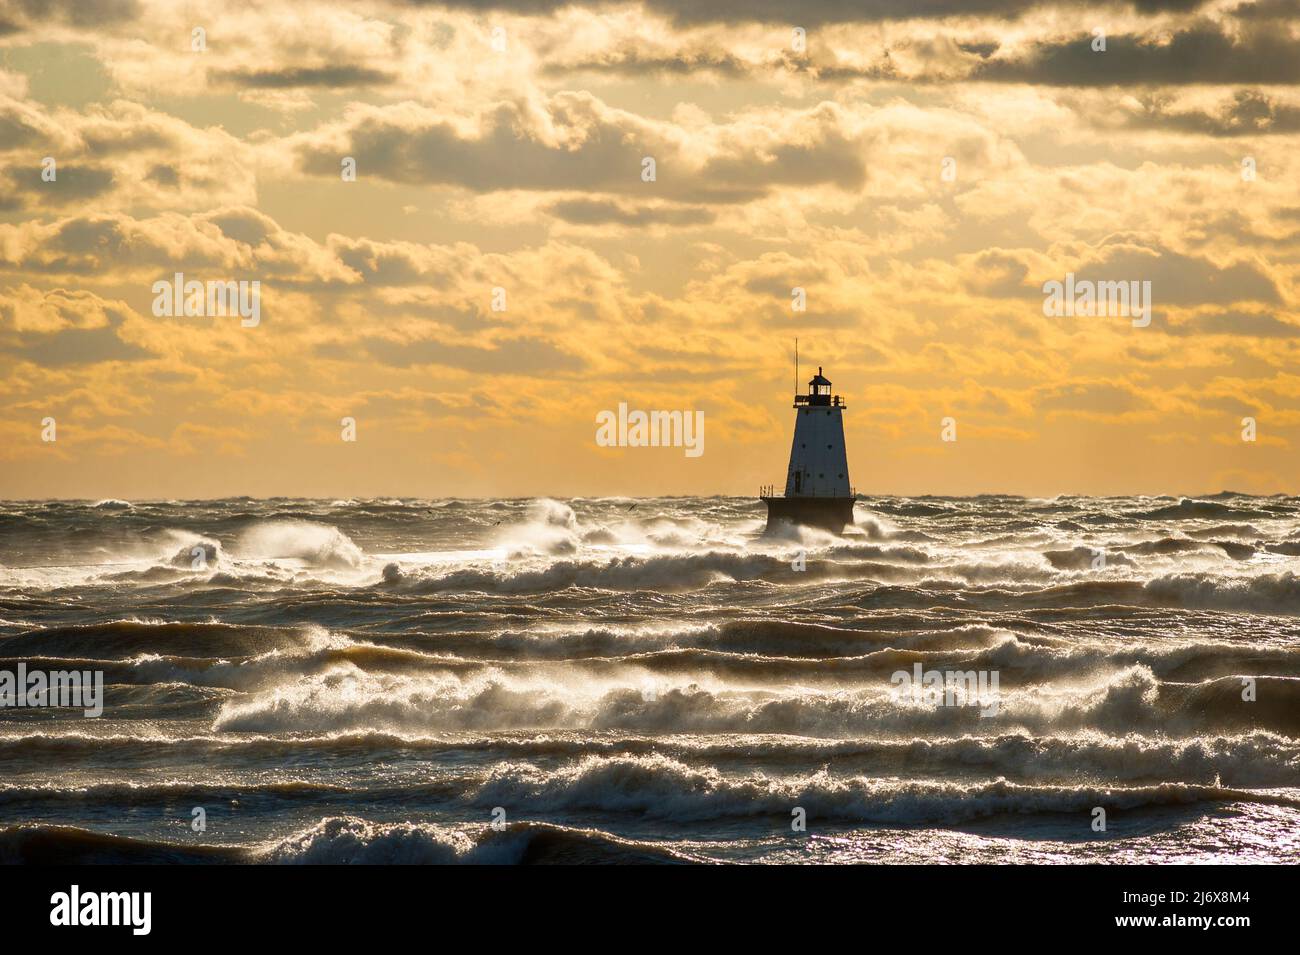 Beautiful sunset over the north breakwall lighthouse at Streans Park in Ludington, Michigan, USA. Stock Photo